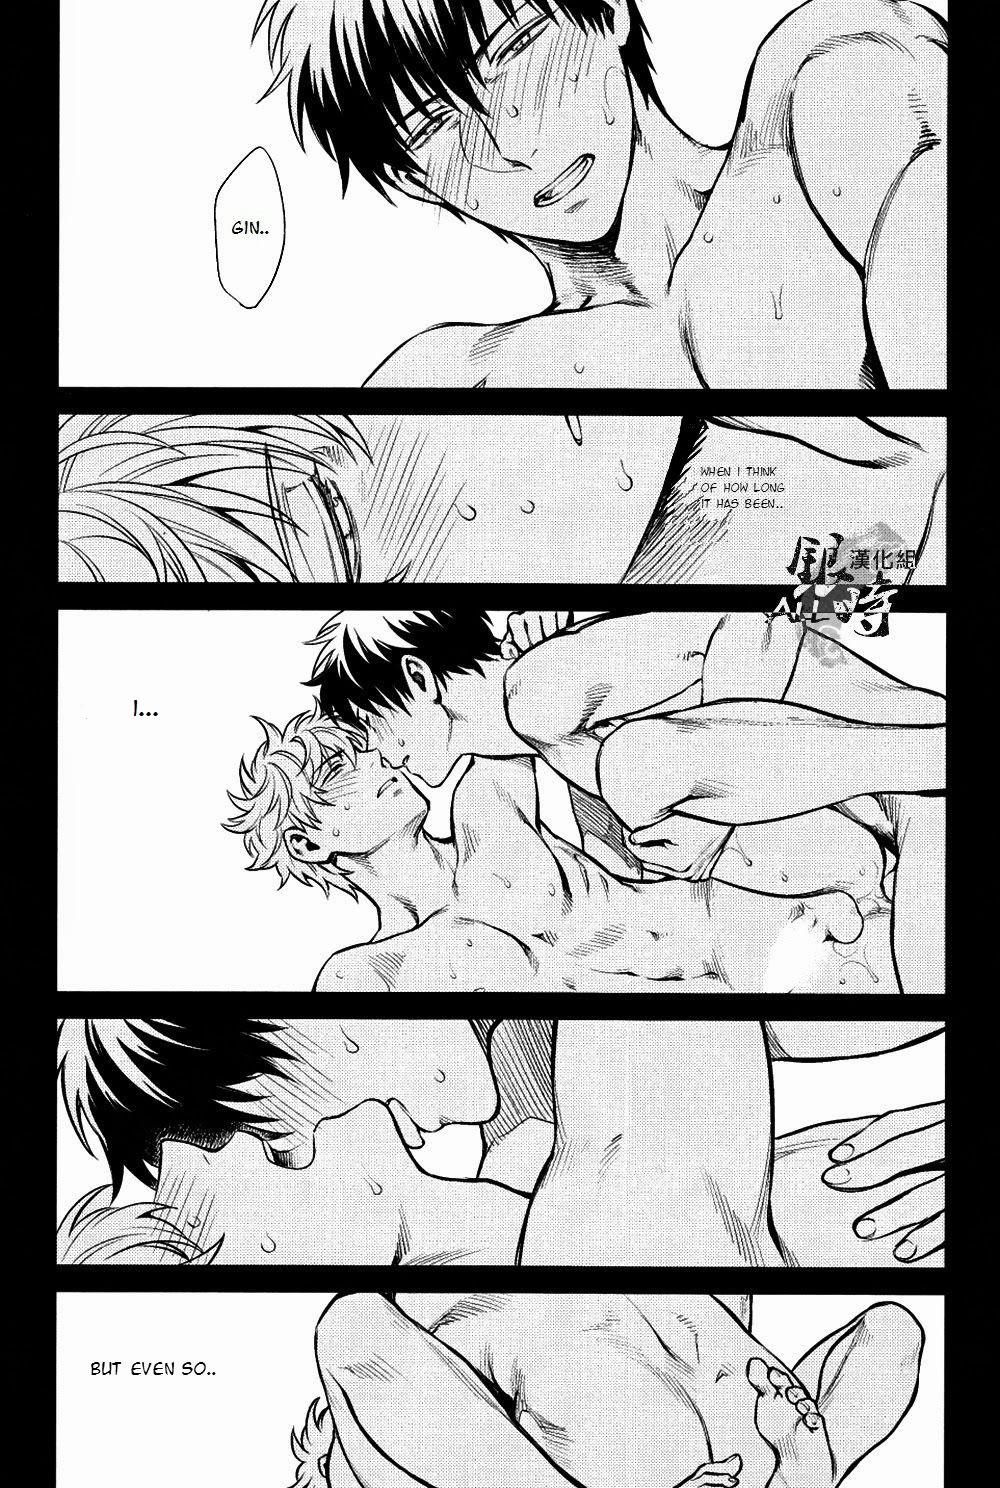 Swinger Please! Gintoki - Gintama And - Page 3